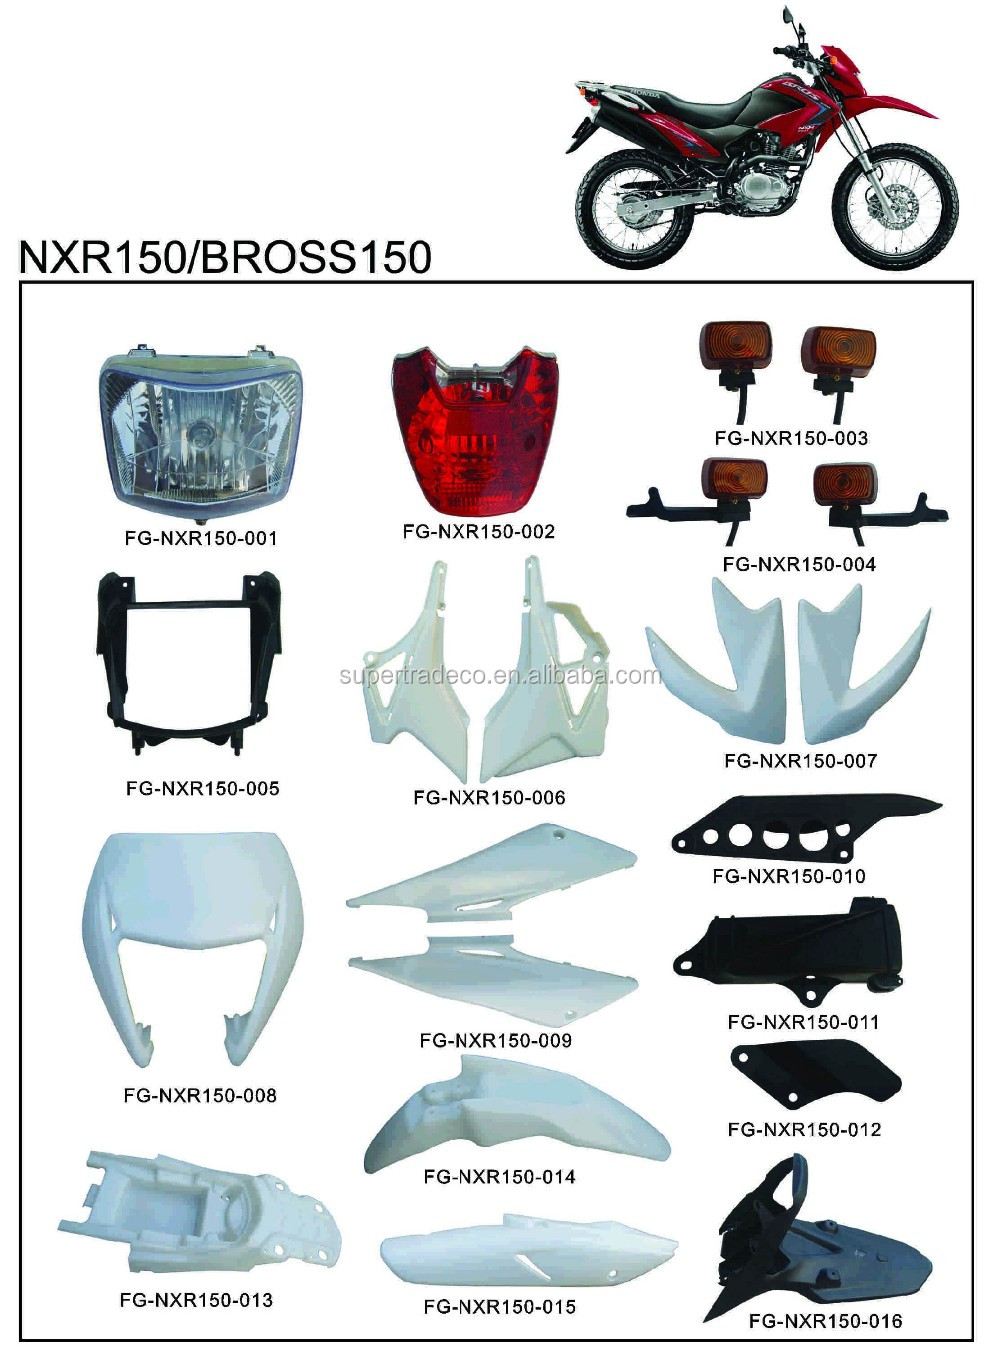 Source COMPLETE PLASTIC PARTS NXR125 / BROSS125 on m.alibaba